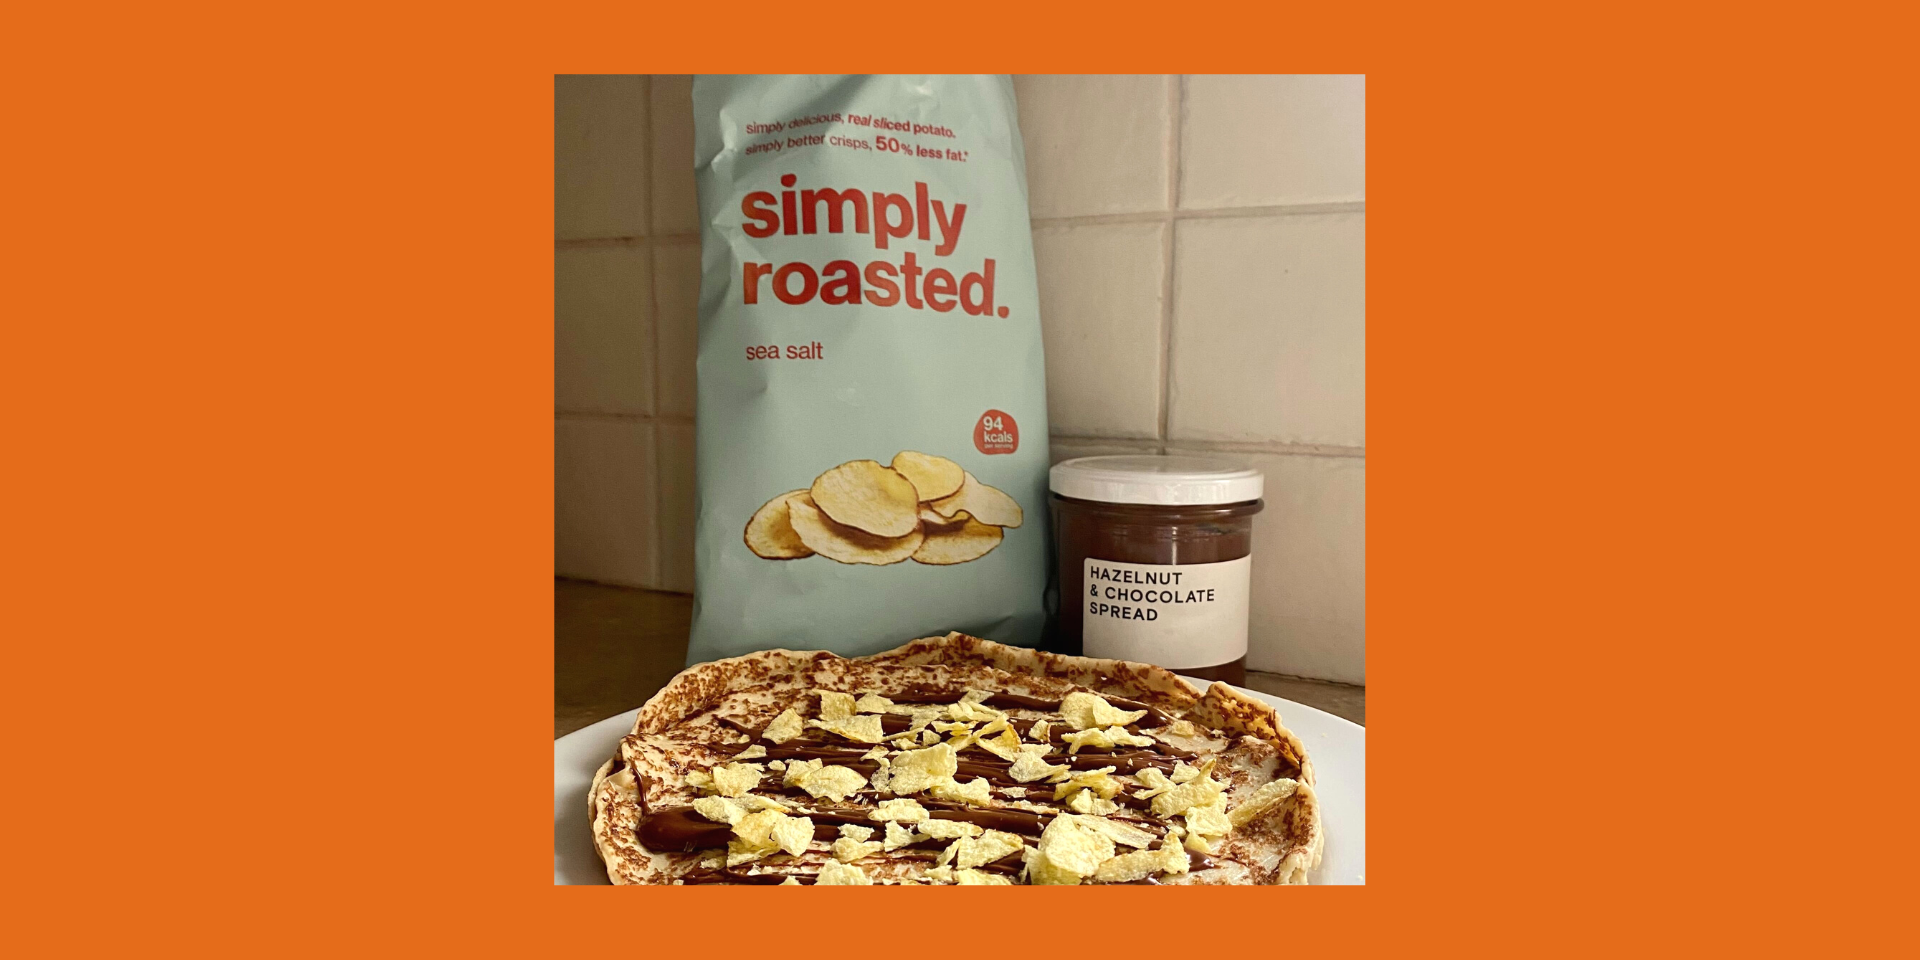 simple recipes by simply roasted - crisps on pancakes